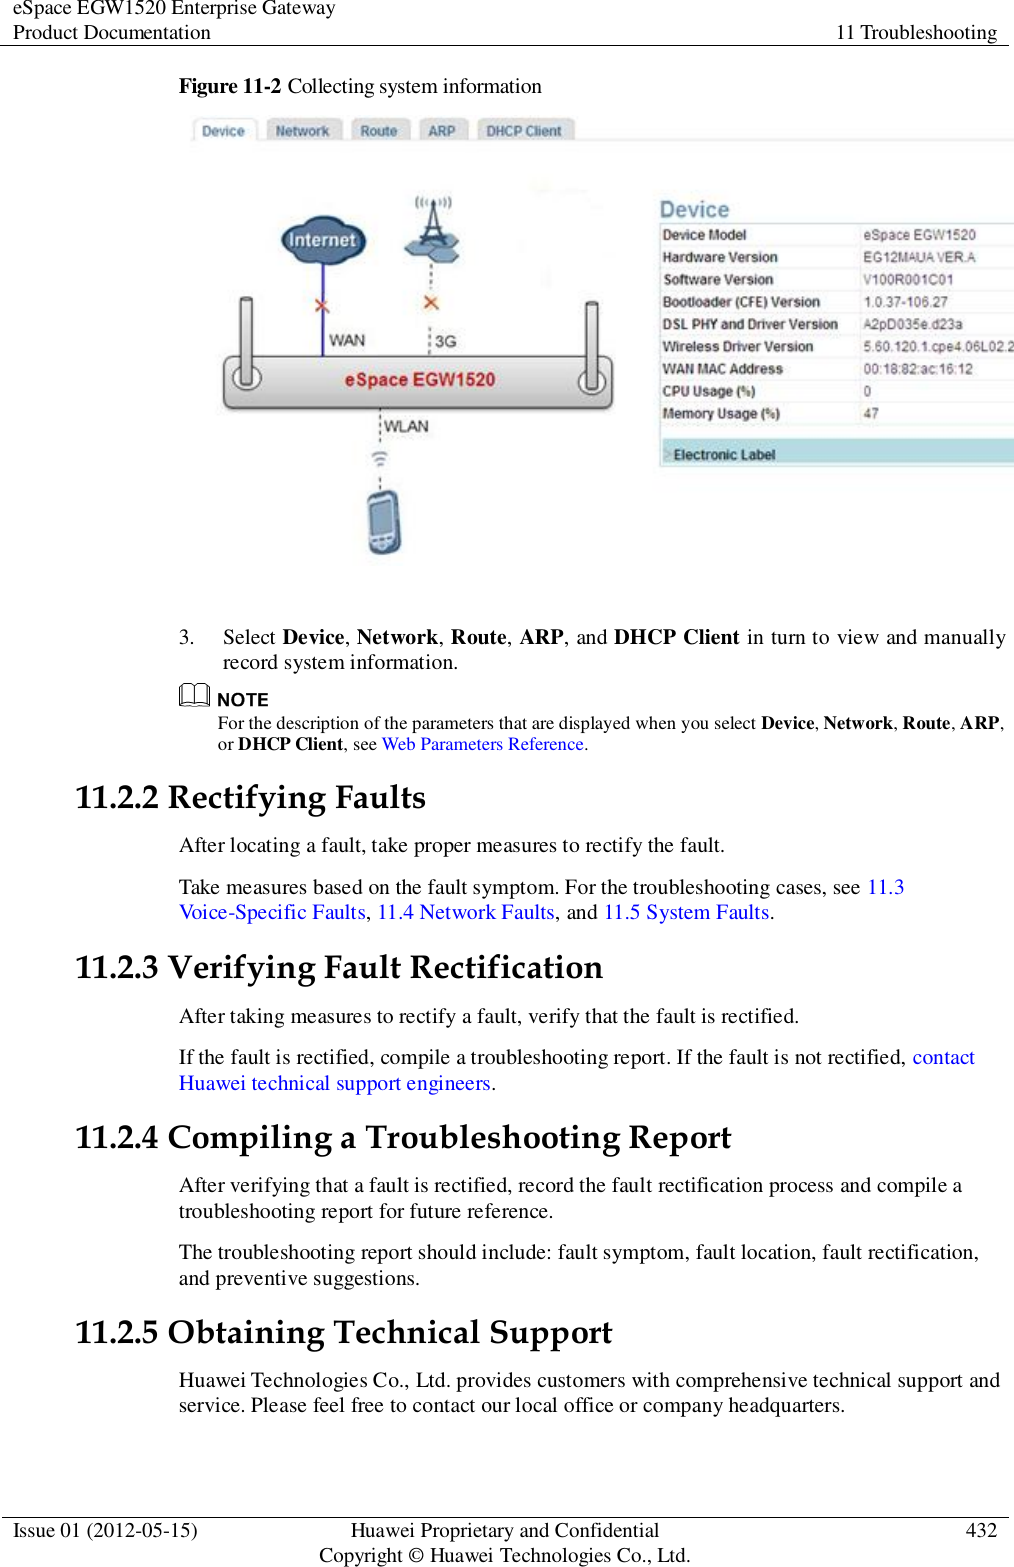 eSpace EGW1520 Enterprise Gateway Product Documentation 11 Troubleshooting  Issue 01 (2012-05-15) Huawei Proprietary and Confidential                                     Copyright © Huawei Technologies Co., Ltd. 432  Figure 11-2 Collecting system information   3. Select Device, Network, Route, ARP, and DHCP Client in turn to view and manually record system information.    For the description of the parameters that are displayed when you select Device, Network, Route, ARP, or DHCP Client, see Web Parameters Reference. 11.2.2 Rectifying Faults After locating a fault, take proper measures to rectify the fault. Take measures based on the fault symptom. For the troubleshooting cases, see 11.3 Voice-Specific Faults, 11.4 Network Faults, and 11.5 System Faults. 11.2.3 Verifying Fault Rectification After taking measures to rectify a fault, verify that the fault is rectified. If the fault is rectified, compile a troubleshooting report. If the fault is not rectified, contact Huawei technical support engineers. 11.2.4 Compiling a Troubleshooting Report After verifying that a fault is rectified, record the fault rectification process and compile a troubleshooting report for future reference. The troubleshooting report should include: fault symptom, fault location, fault rectification, and preventive suggestions. 11.2.5 Obtaining Technical Support Huawei Technologies Co., Ltd. provides customers with comprehensive technical support and service. Please feel free to contact our local office or company headquarters. 